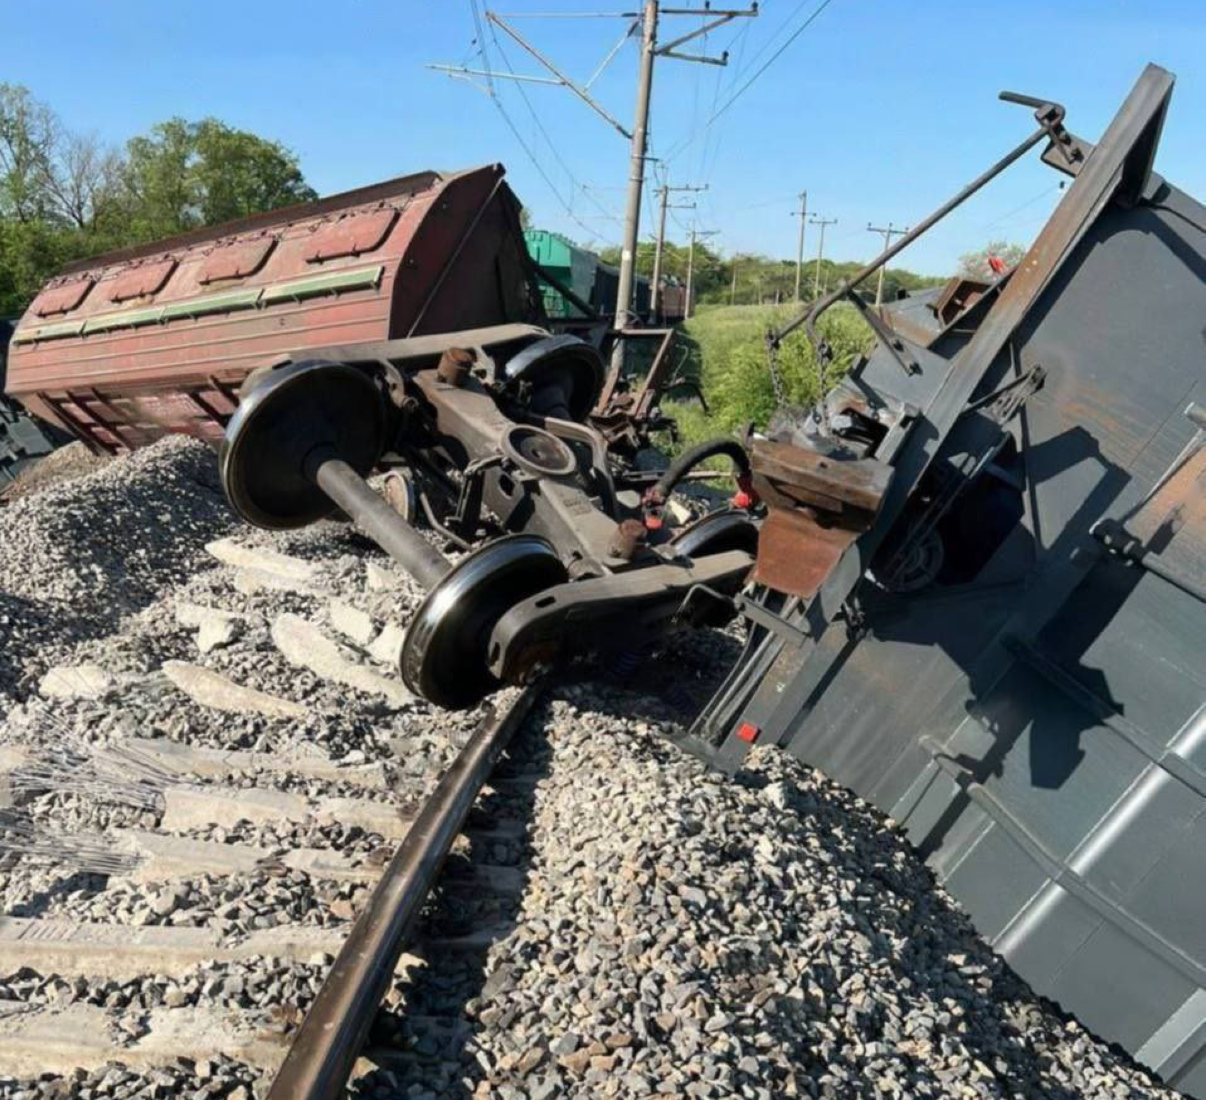 Derailed russian train near Simferopol, Crimea, May 18 Defense Express Railway Used for Weapons Transportation Explodes Derailing Grain Wagons in Crimea, Missile Discovery Raises Concerns